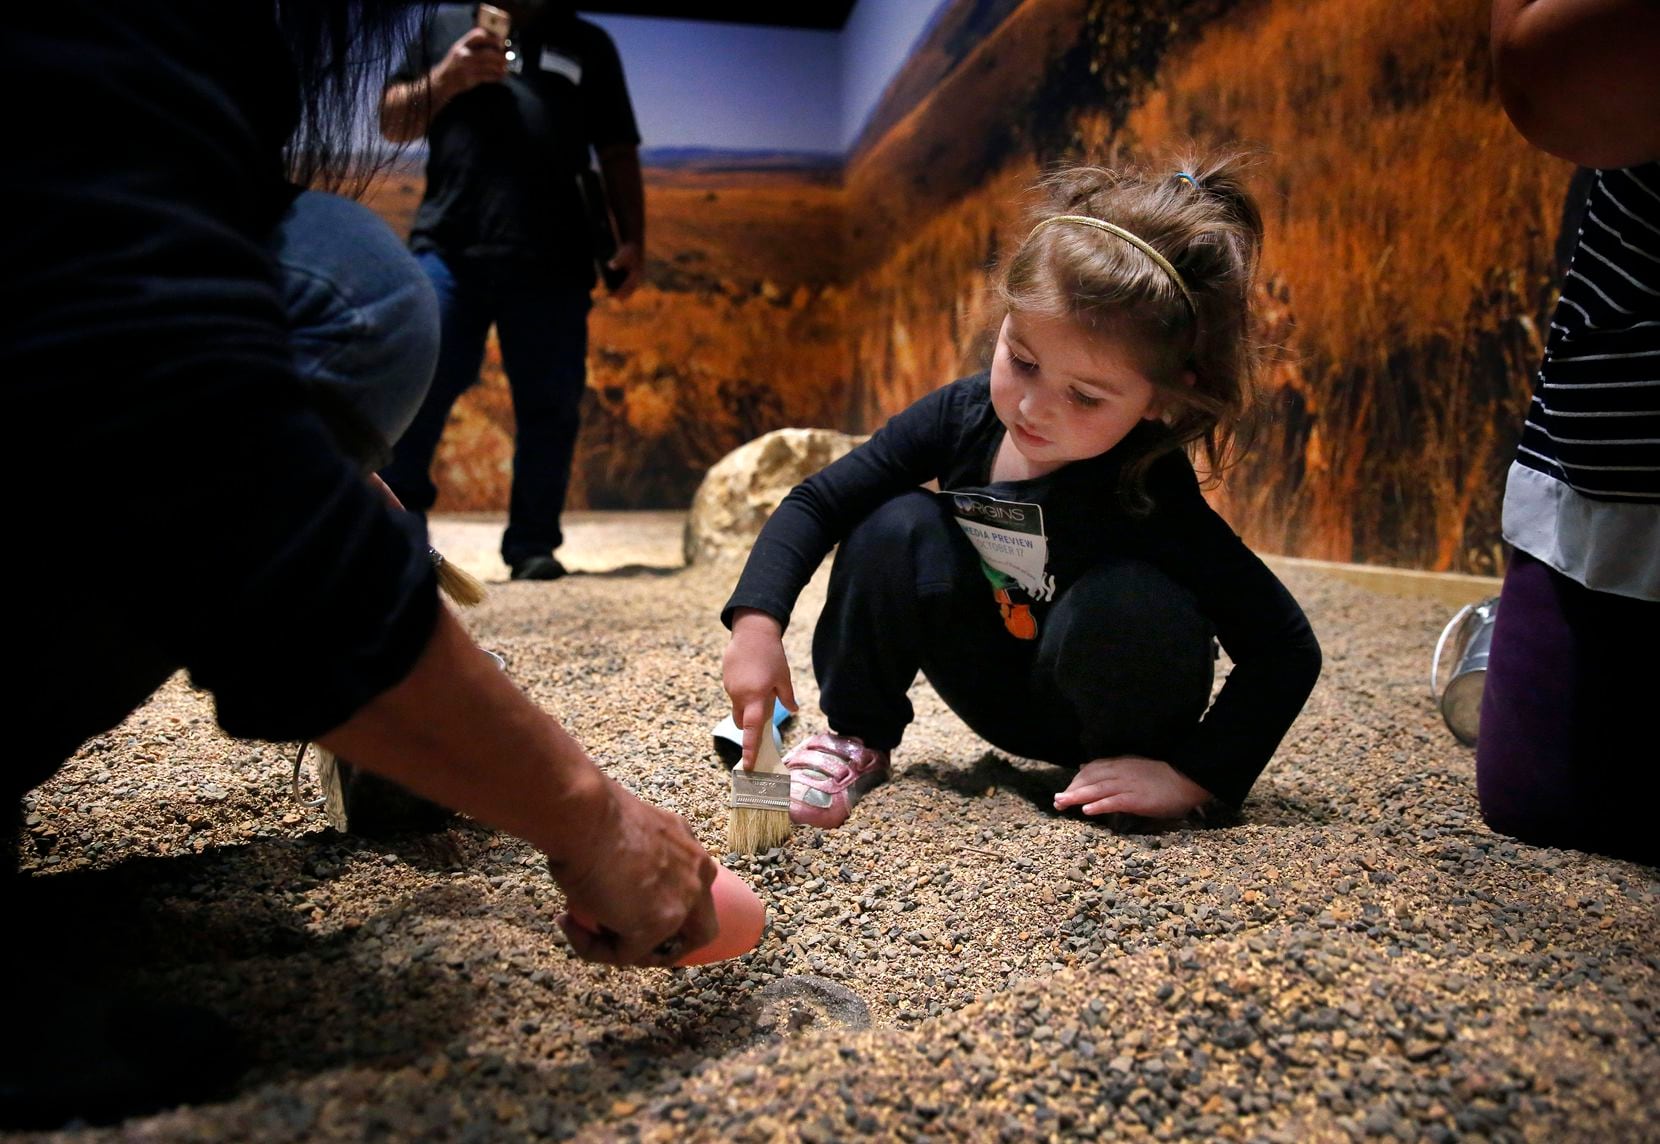 Lily Torrence digs for a fossil in the dig site interactive area of the Perot Museum of Nature and Science's special exhibit "Origins: Fossils From the Cradle of Humankind," which is on display through March 22.